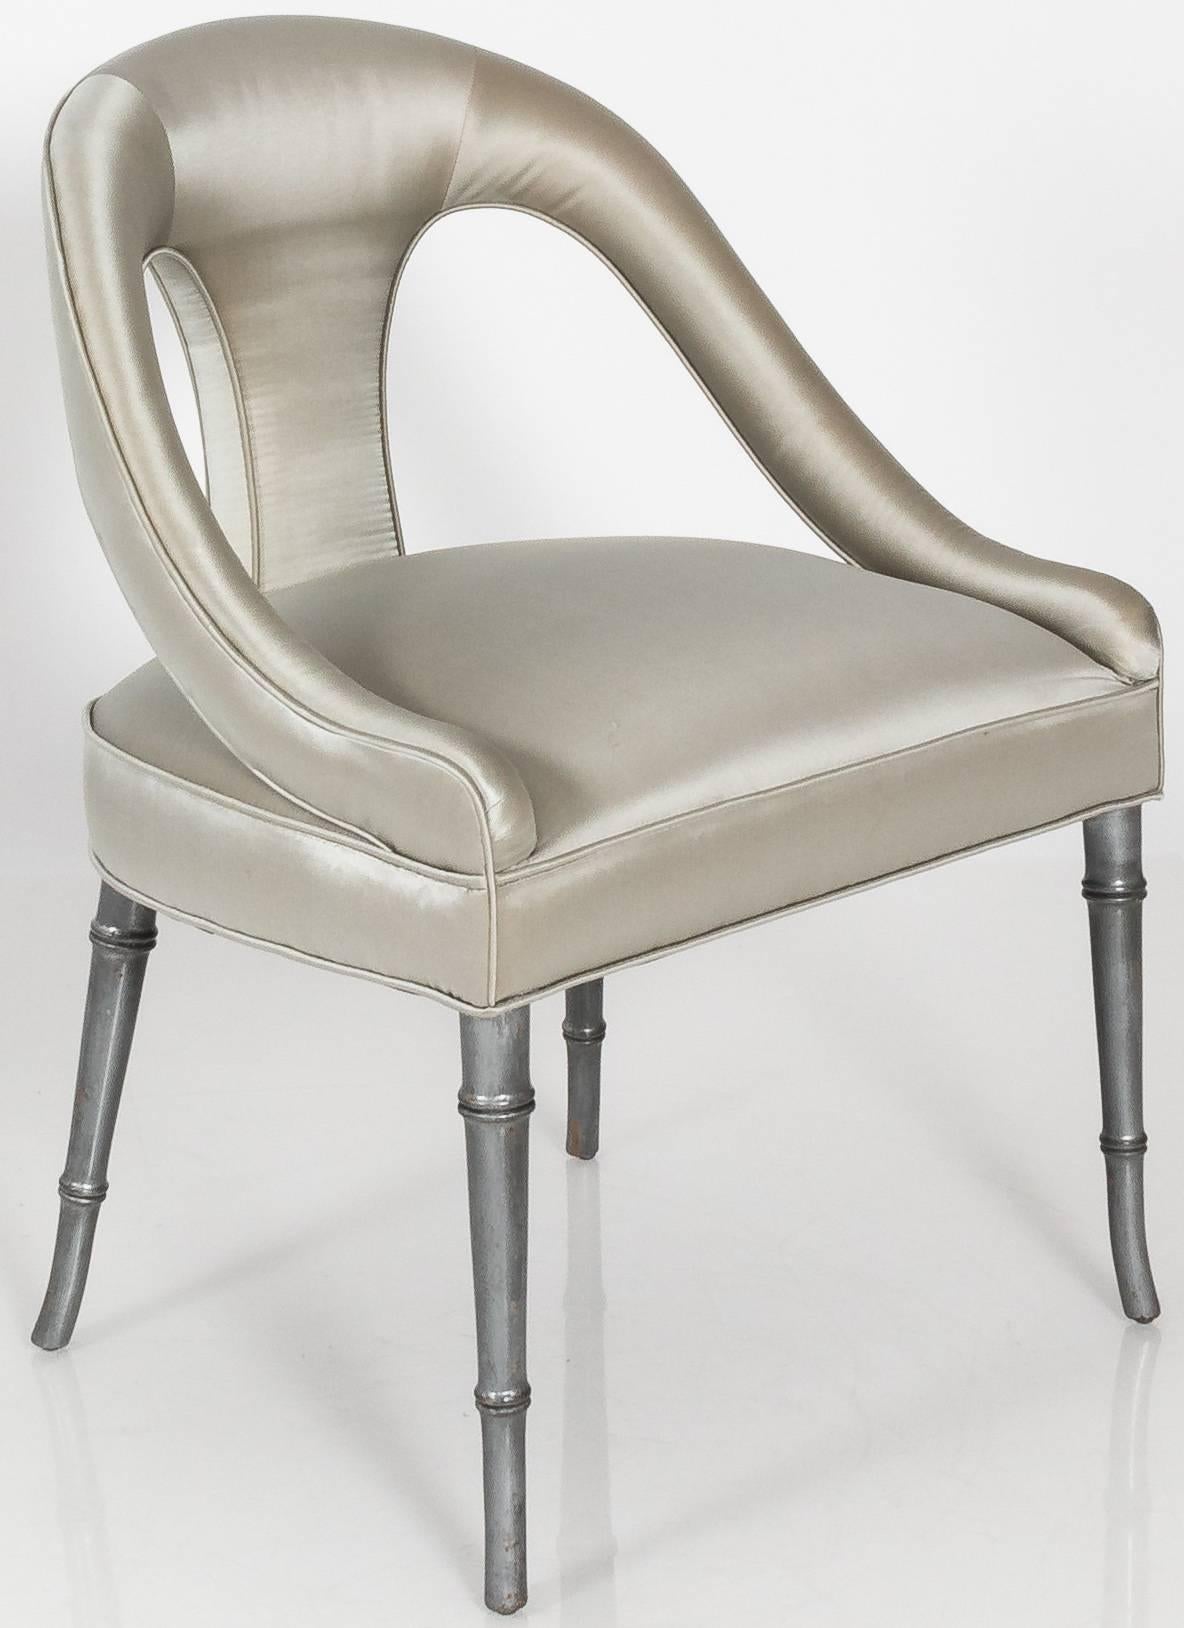 Elegant newly upholstered silver bamboo leg spoon back slipper chair. Newly upholstered in oyster silk satin. Measures: Seat is 18